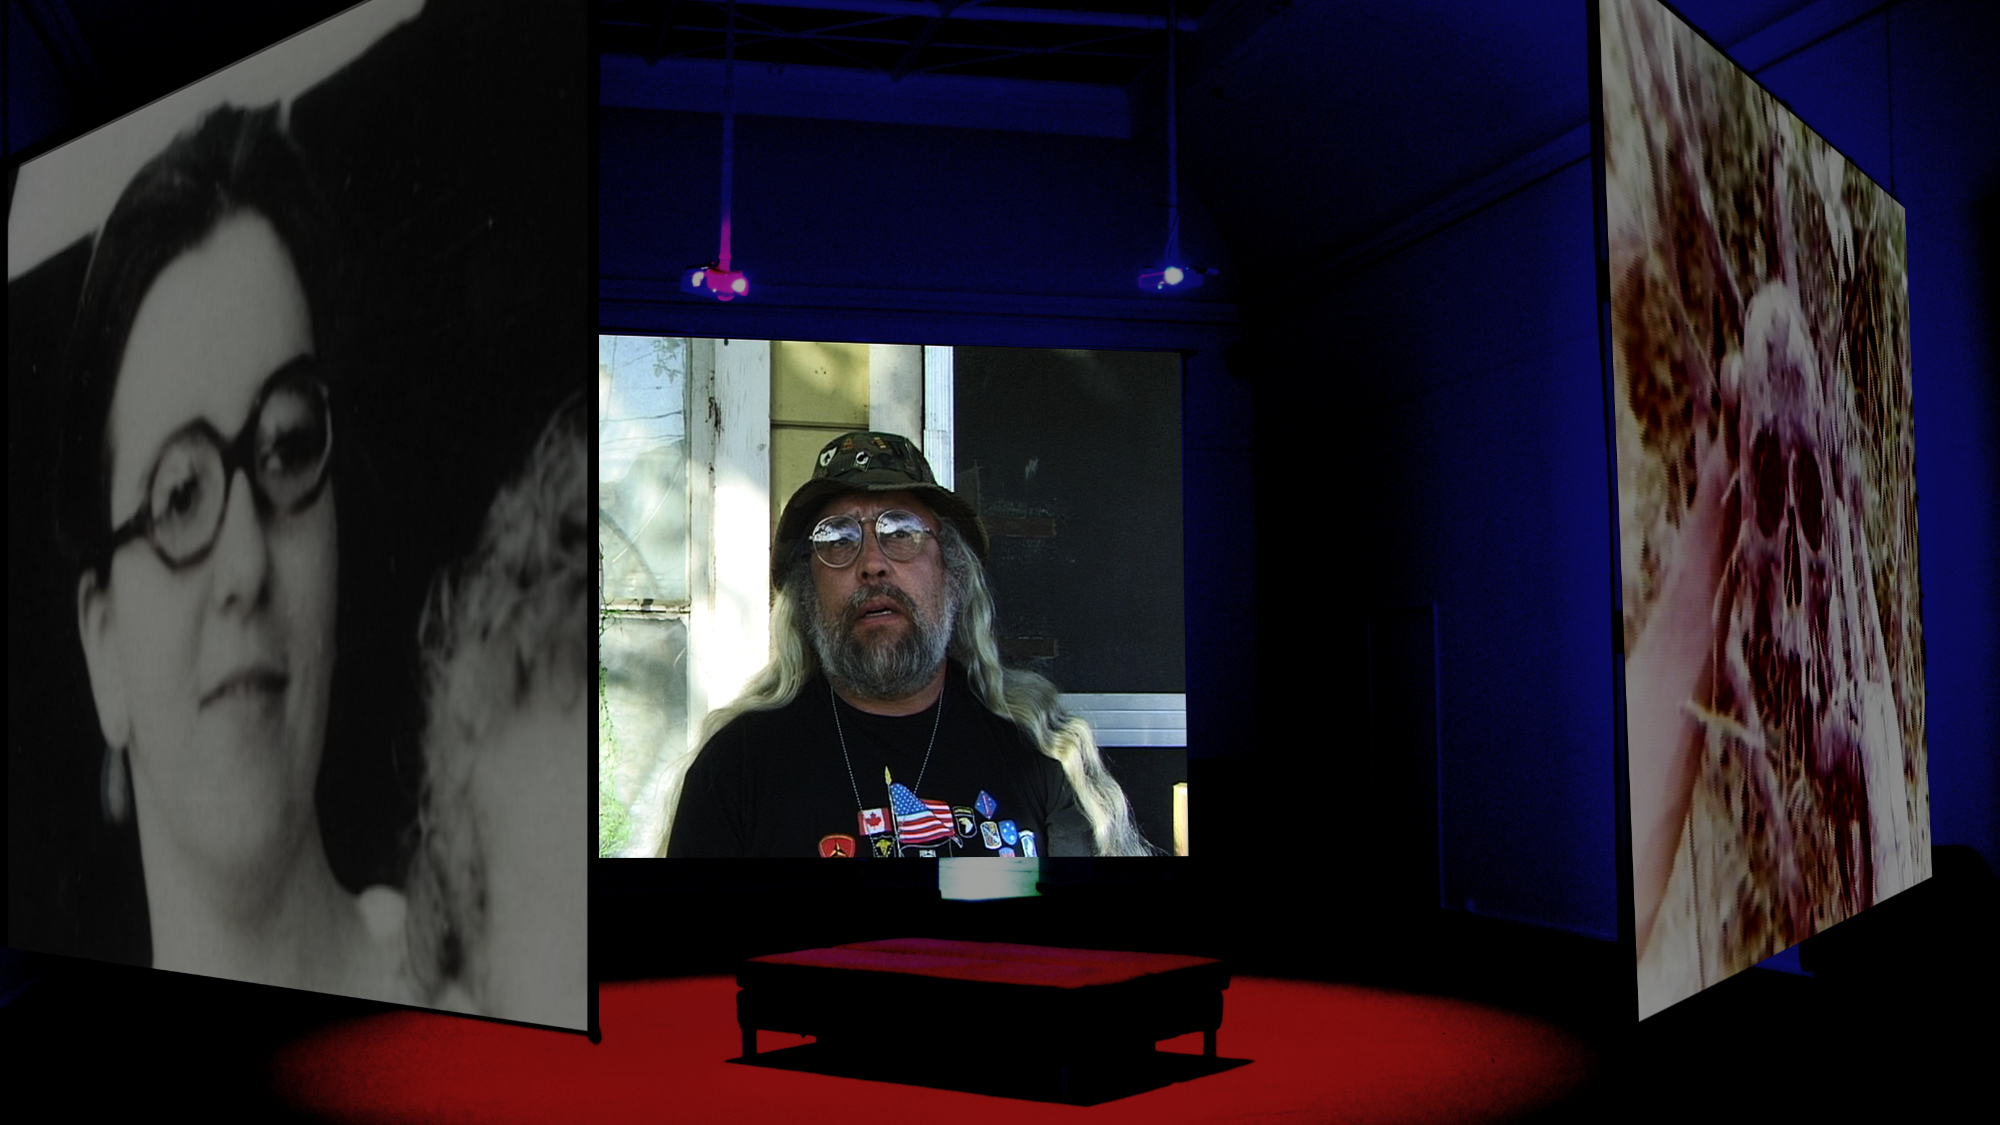 The Two Faces of Roman Martinez installation view. The film and the installation revolves around the experiences of three generations of American combat veterans suffering from PTSD that meets for therapy sessions. The main character is Roman Martinez, a Vietnam veteran